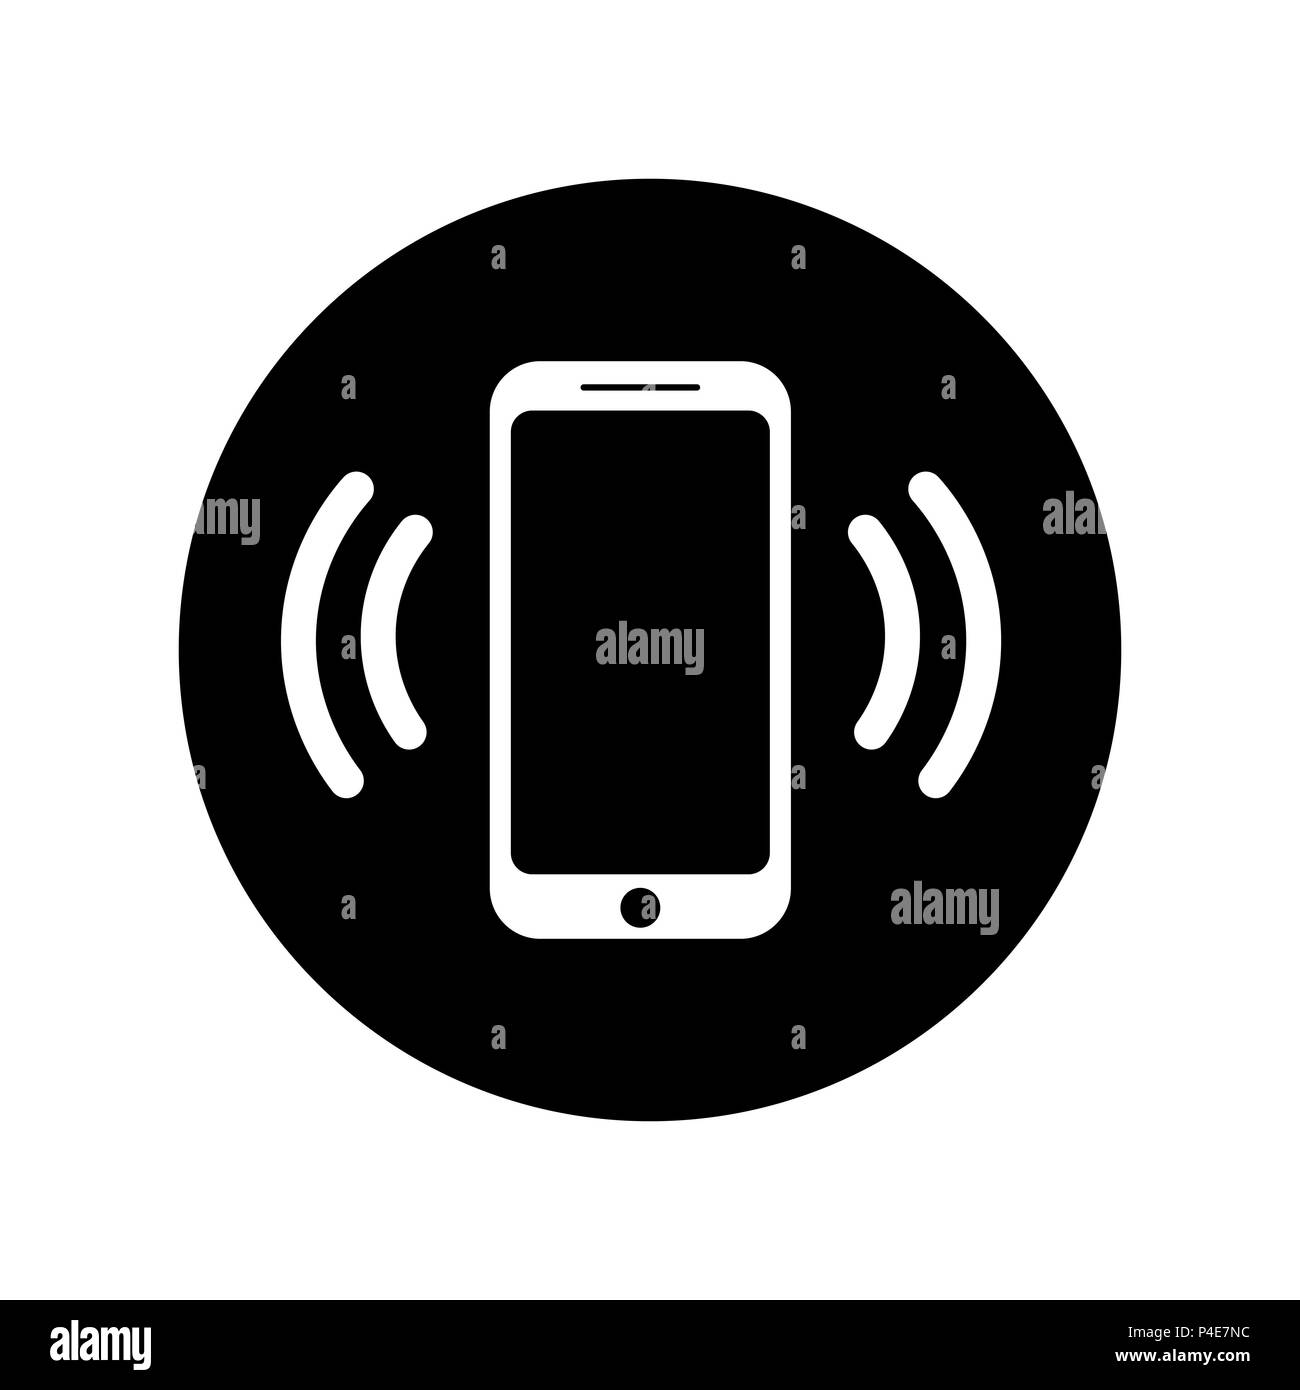 Ringing phone icon in circle. Mobile call icon Stock Vector